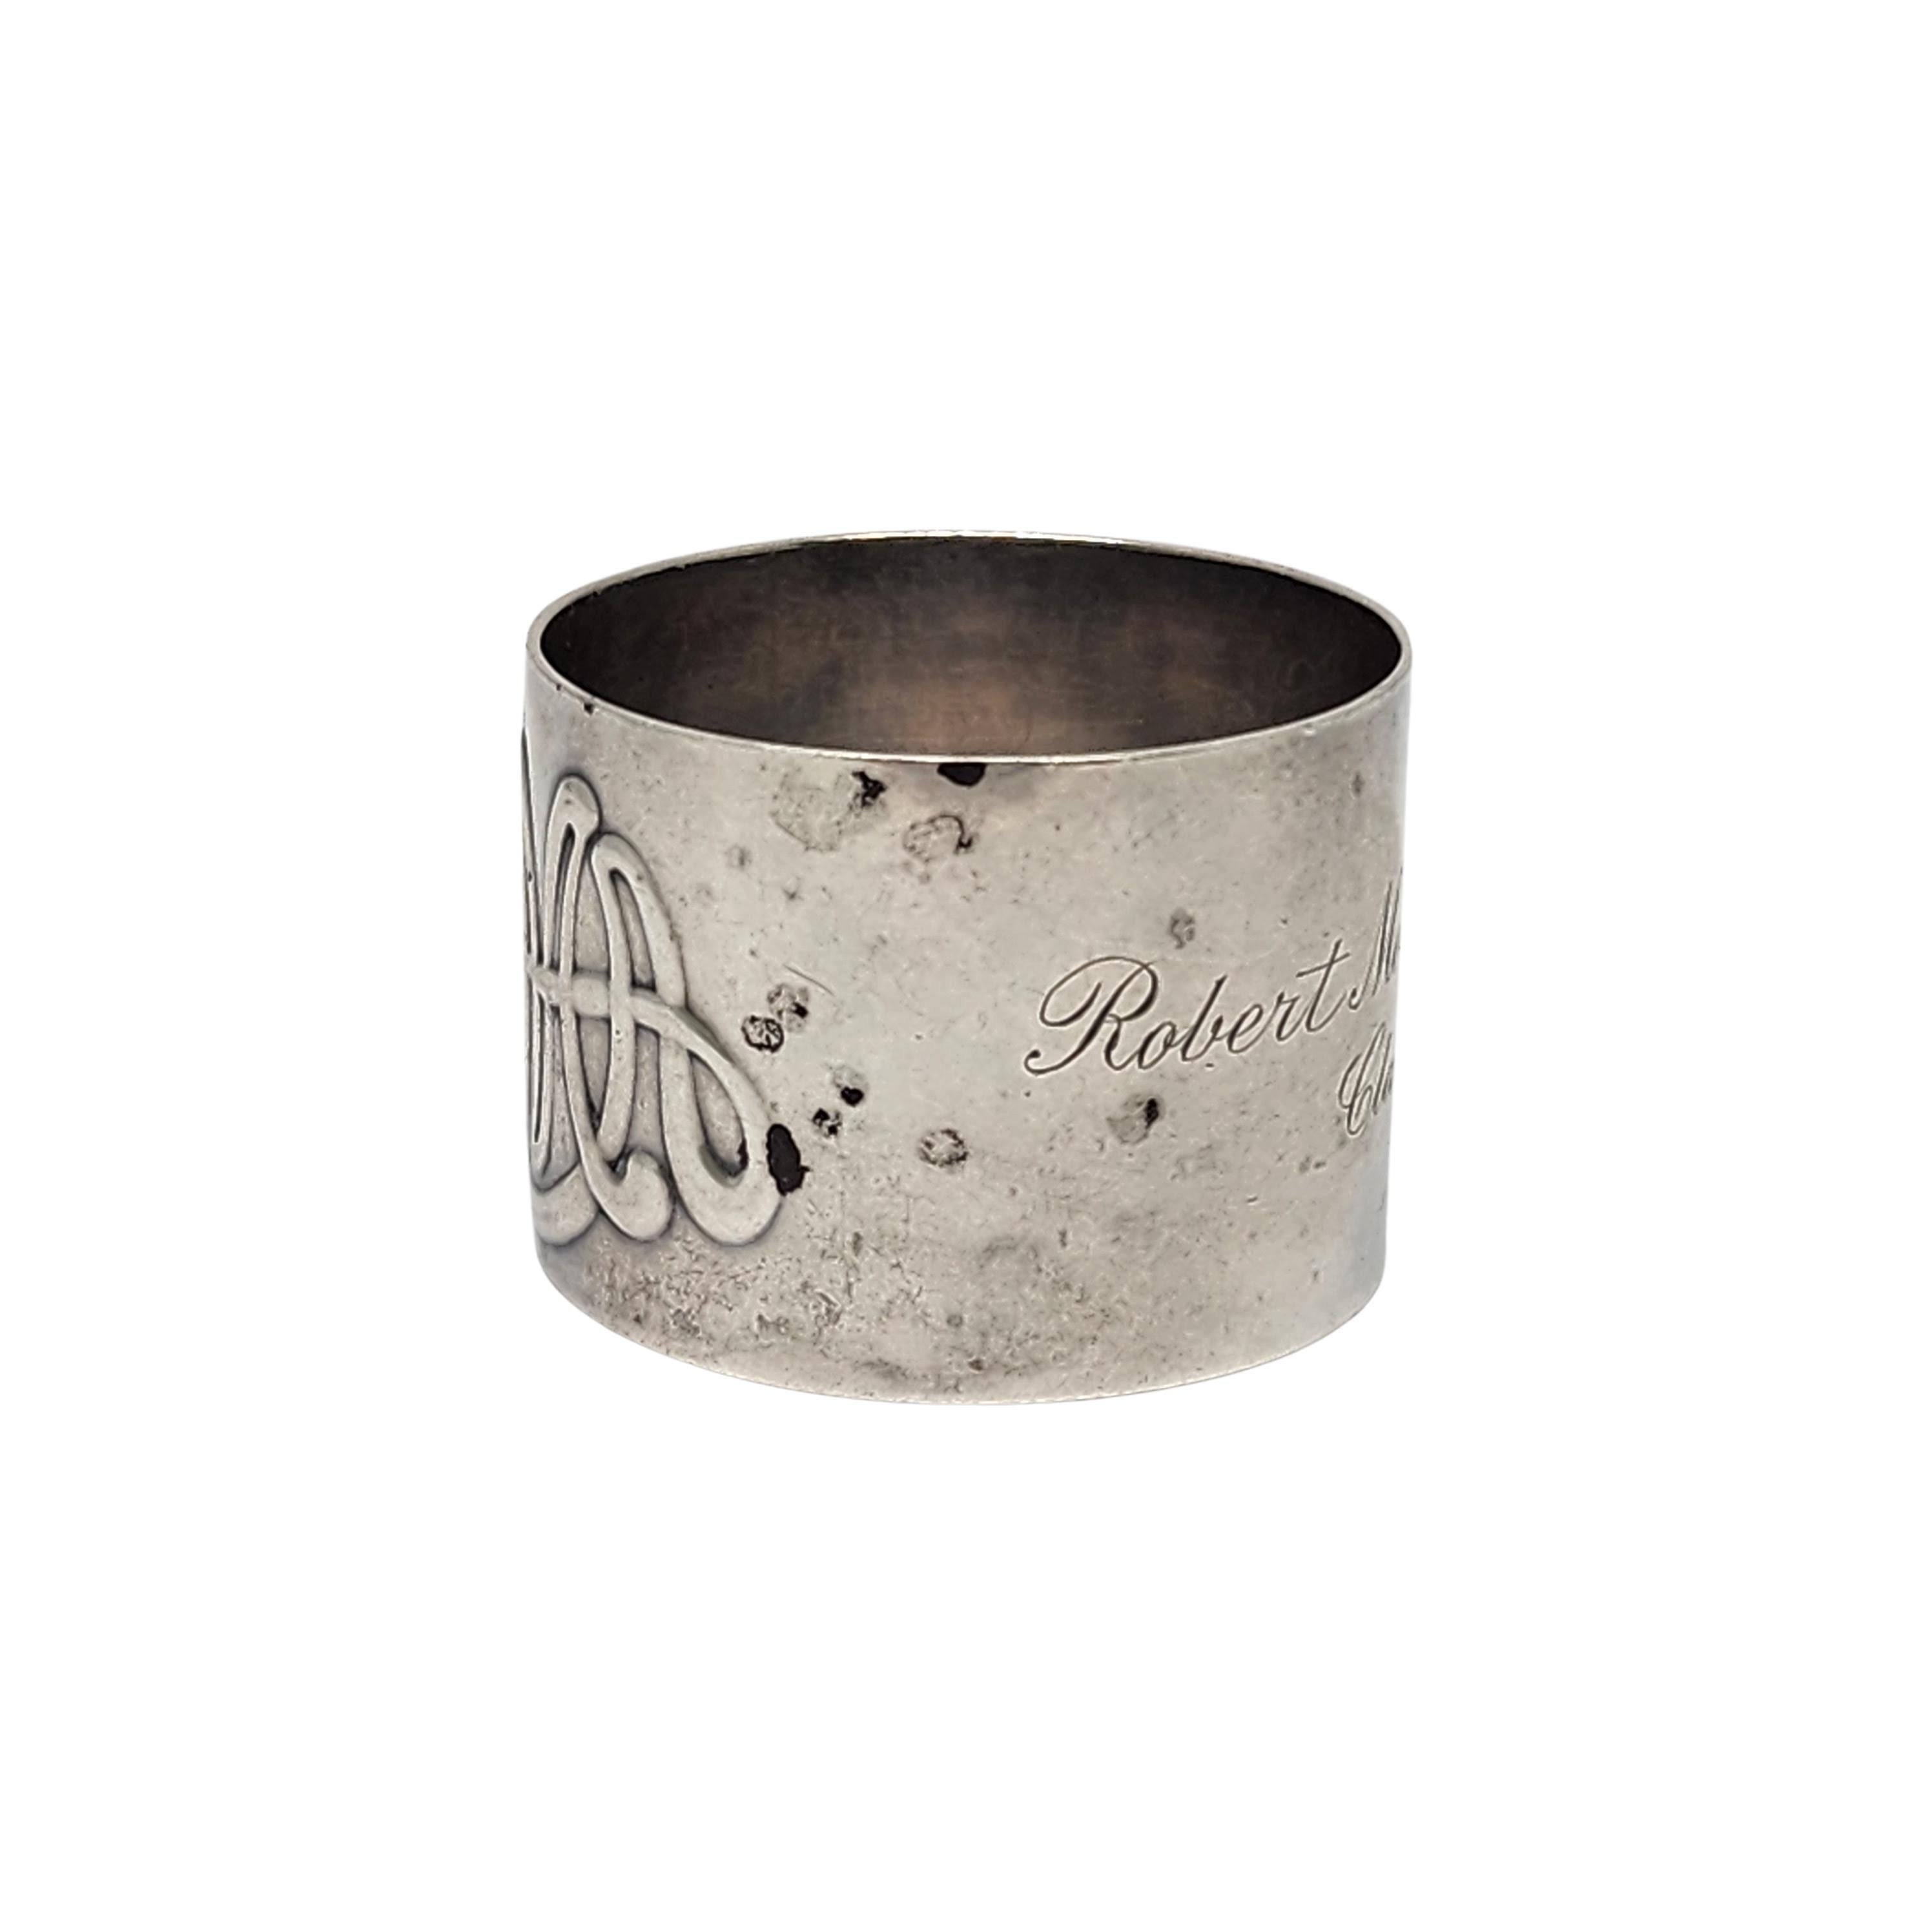 Sterling silver USMA Class of 1915 napkin ring by Gorham.

Engraving appears to be Robert Moorehouse Bruce Class of 1915

A napkin ring commemorating a US Military Academy graduate of 1915.

Measures approx 1 1/4